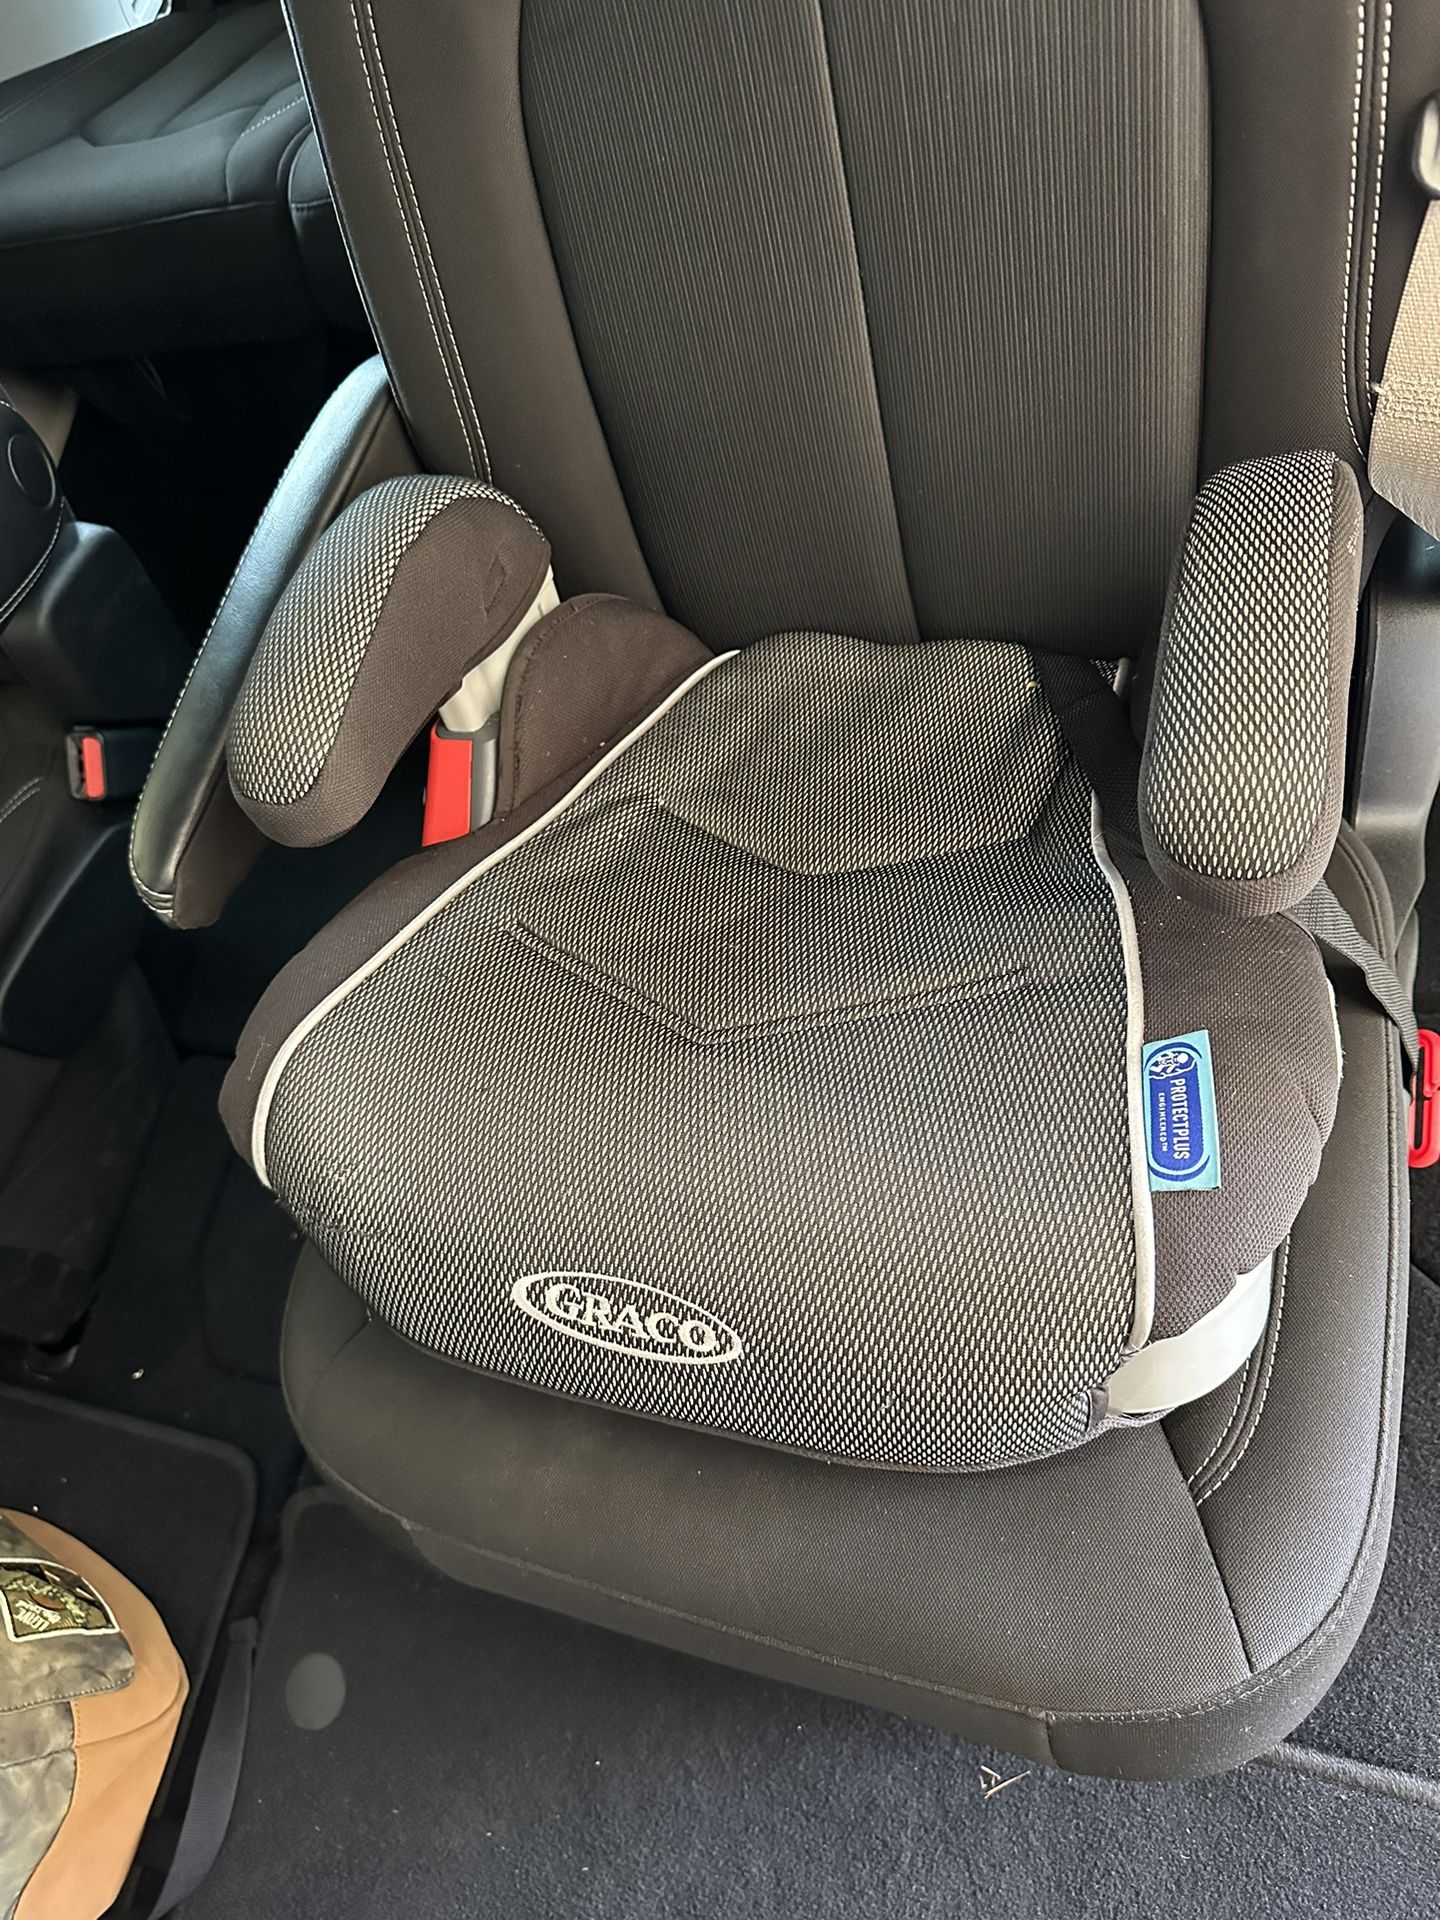 Booster Car Seat Up To 8yrs Old 